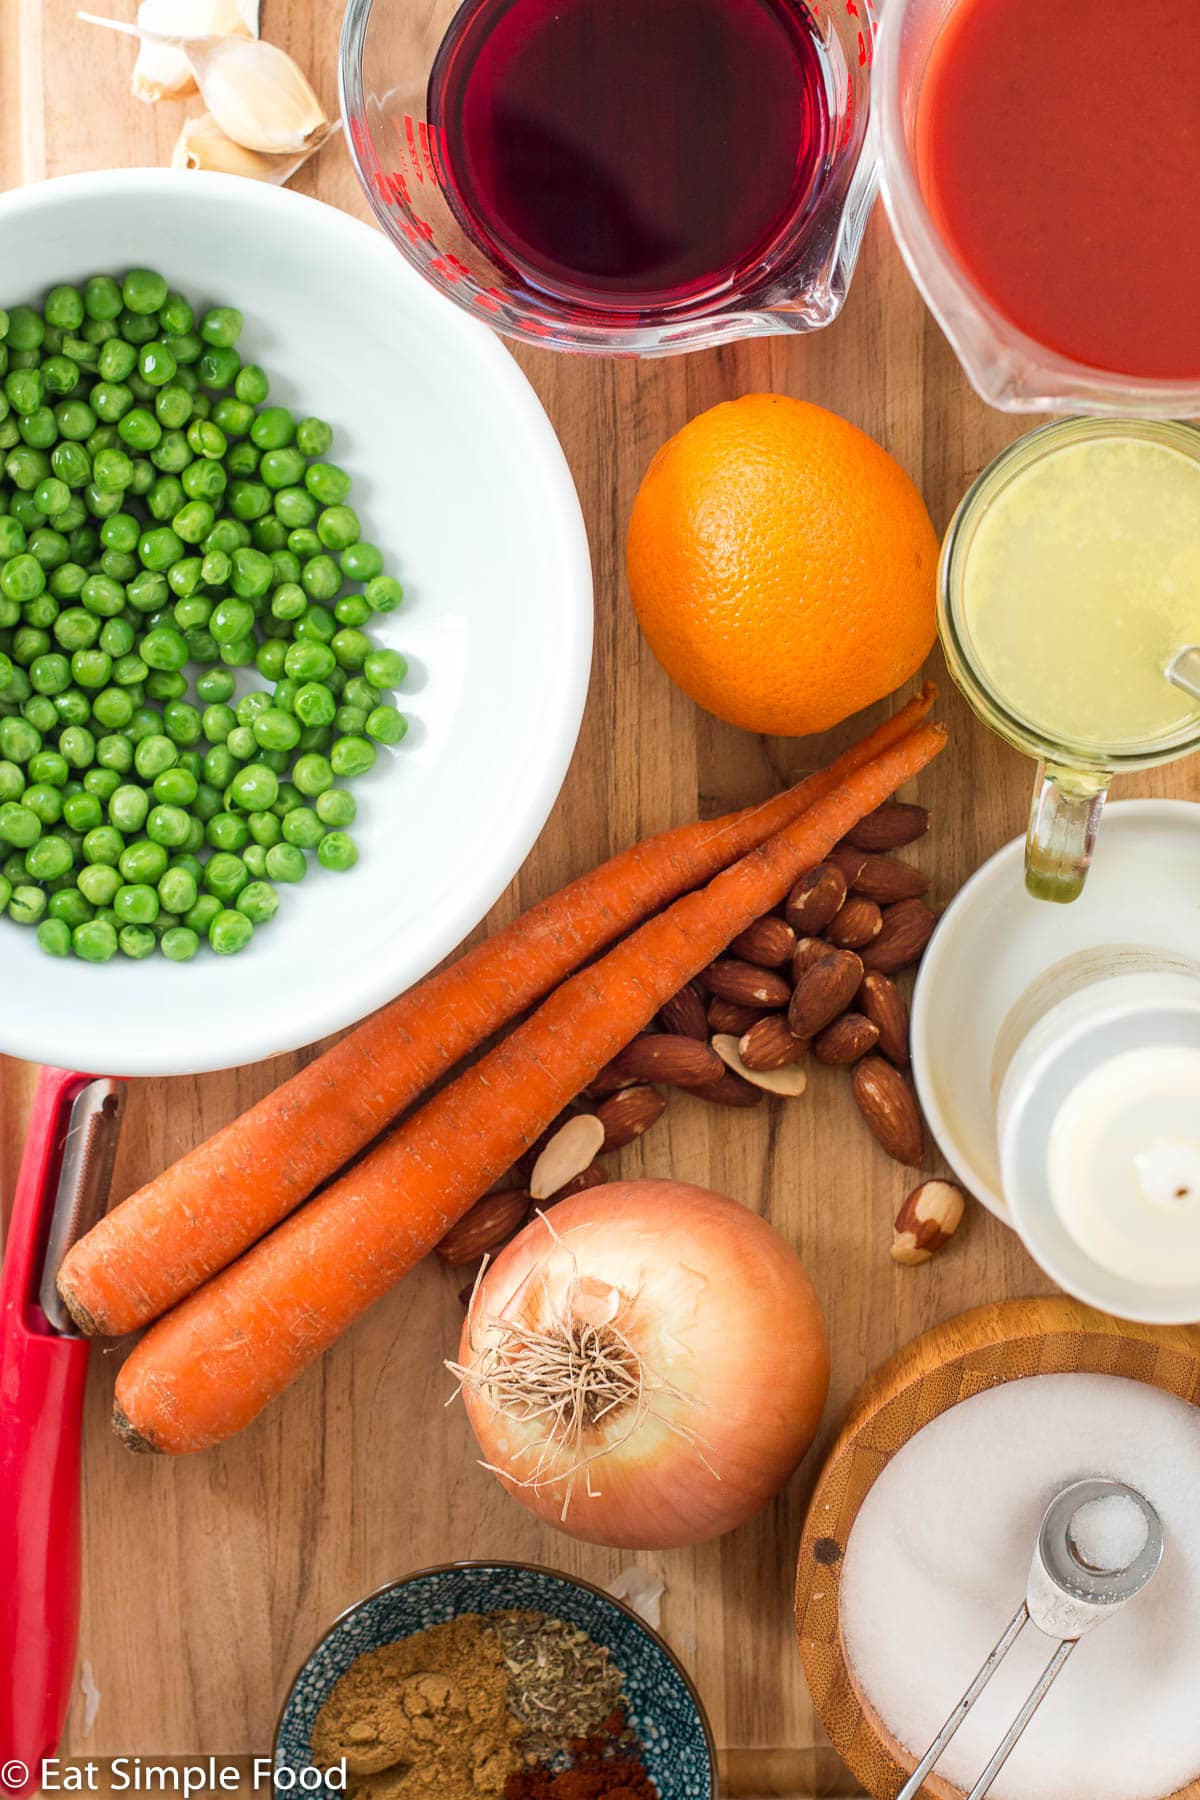 Top view of ingredients on a wood cutting board: bowl of peas, 2 carrots, whole almonds, orange, garlic cloves, spices in a small bowl, bowl of salt, cup of broth, cup of red wine, and cup of tomato juice.